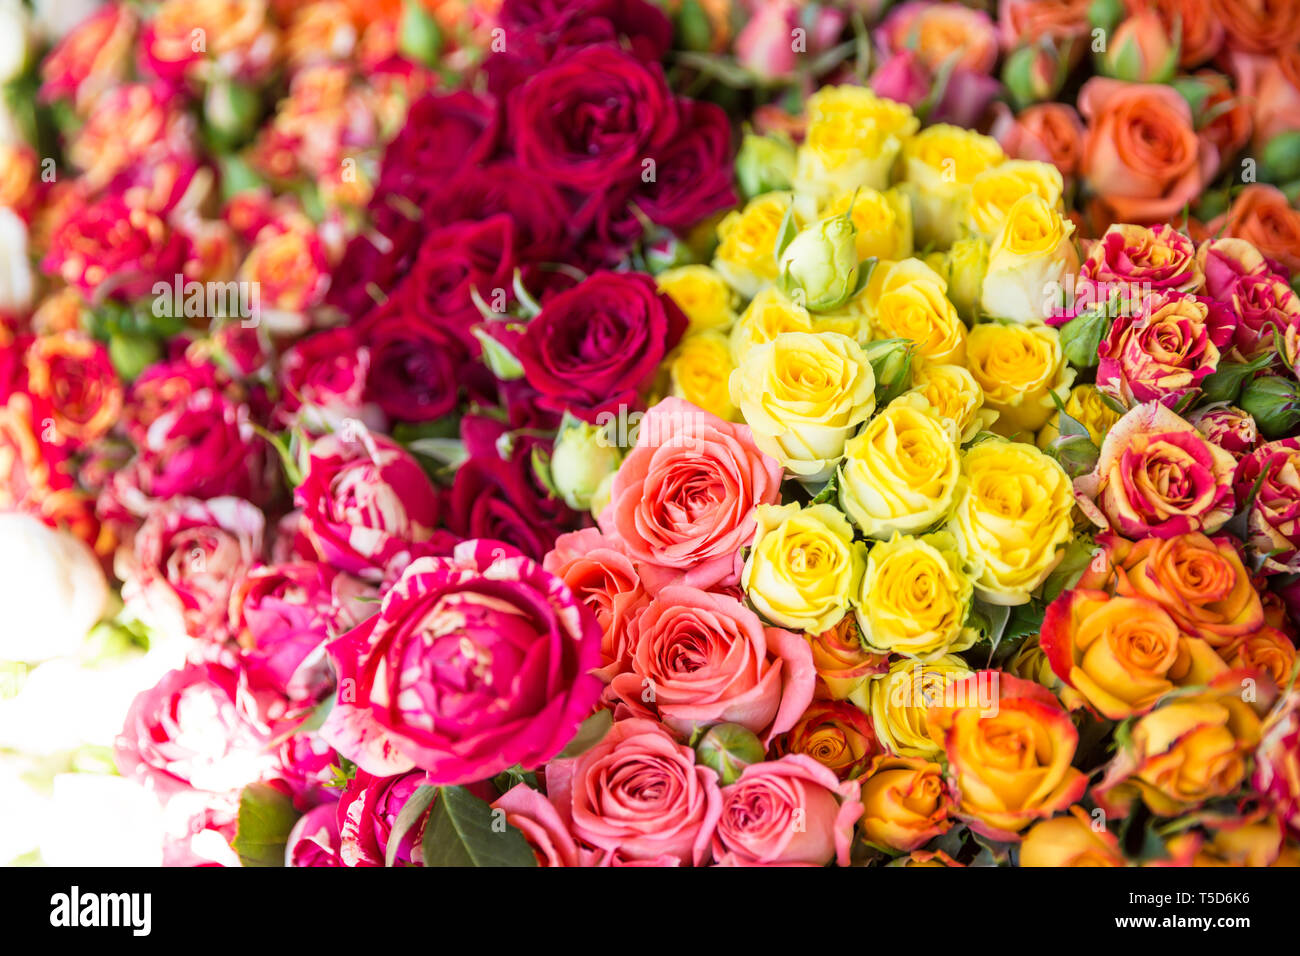 Photo of flower bazaar for graphic and web design, for website or mobile app. Stock Photo